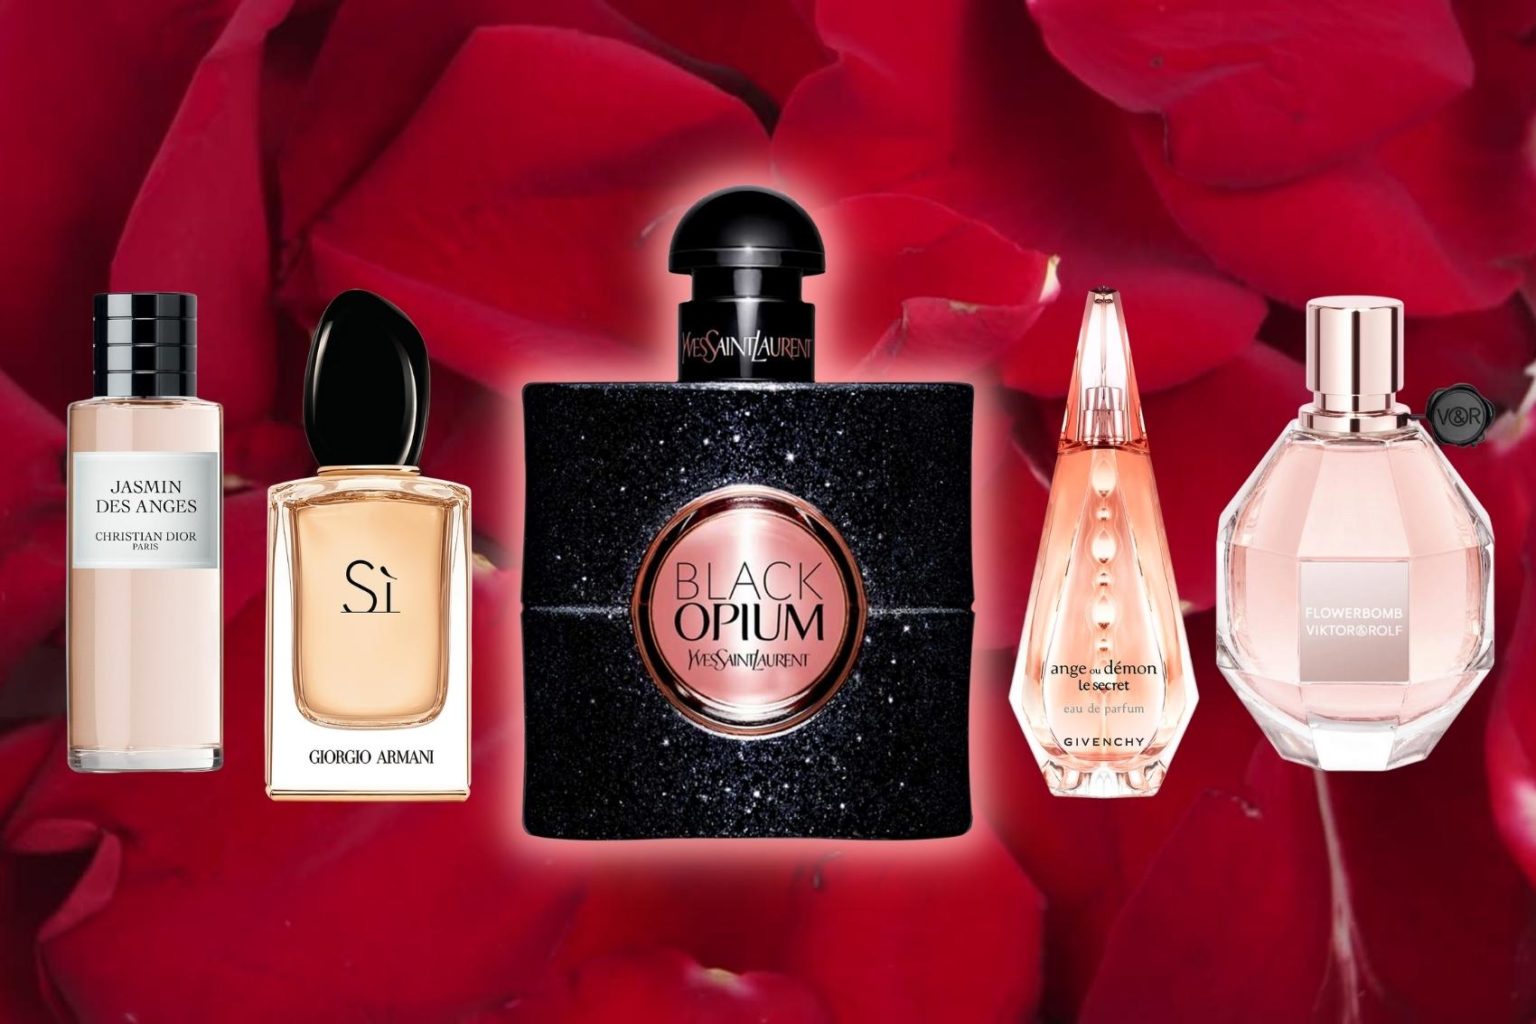 The Best Romantic Perfumes For Date Night - FragranceReview.com